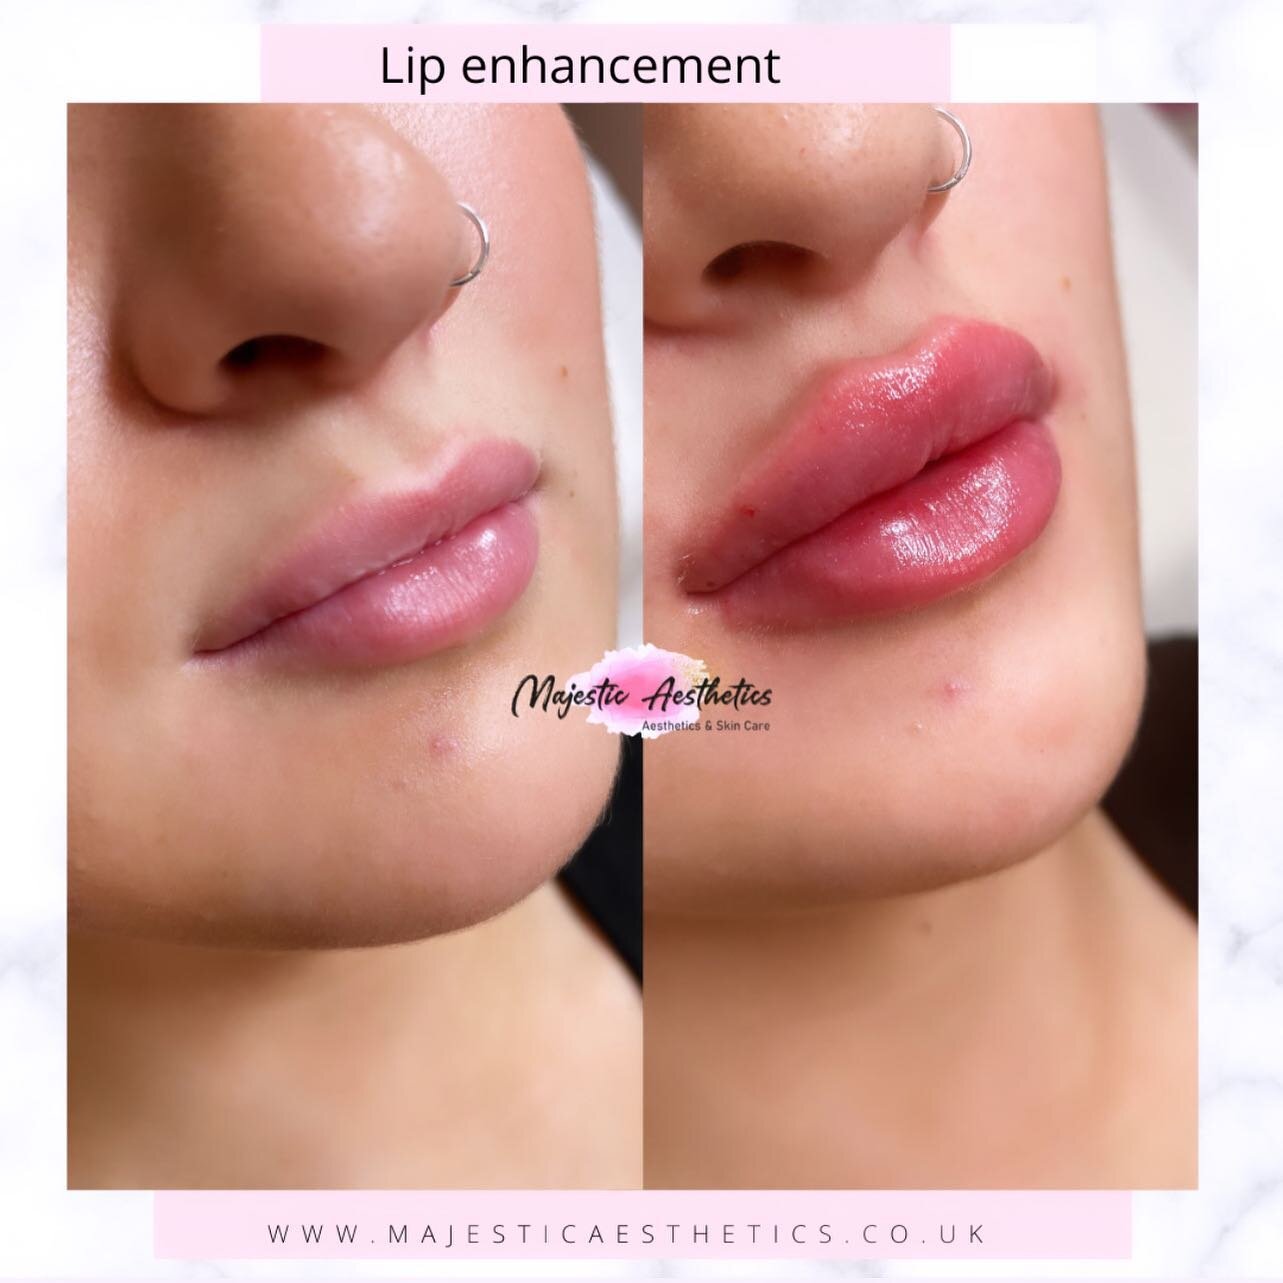 1ml 💉
Swelling can be see especially to the top lip post treatment however this will resolve within 48-72 hours 👄 

Size will reduce once dermal filler has settled in to surrounding lip tissue.

1ml - &pound;220 👄
Topical numbing cream used 👩🏼&z